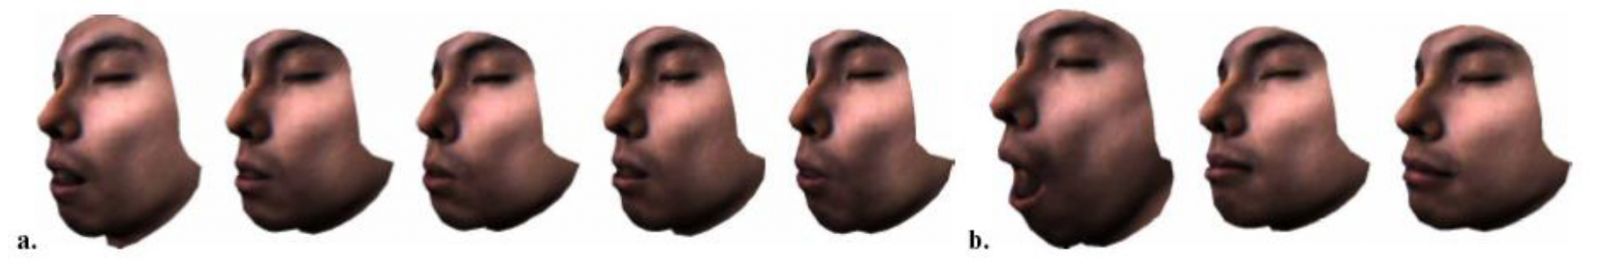 Multi-face image showing a face making a sound